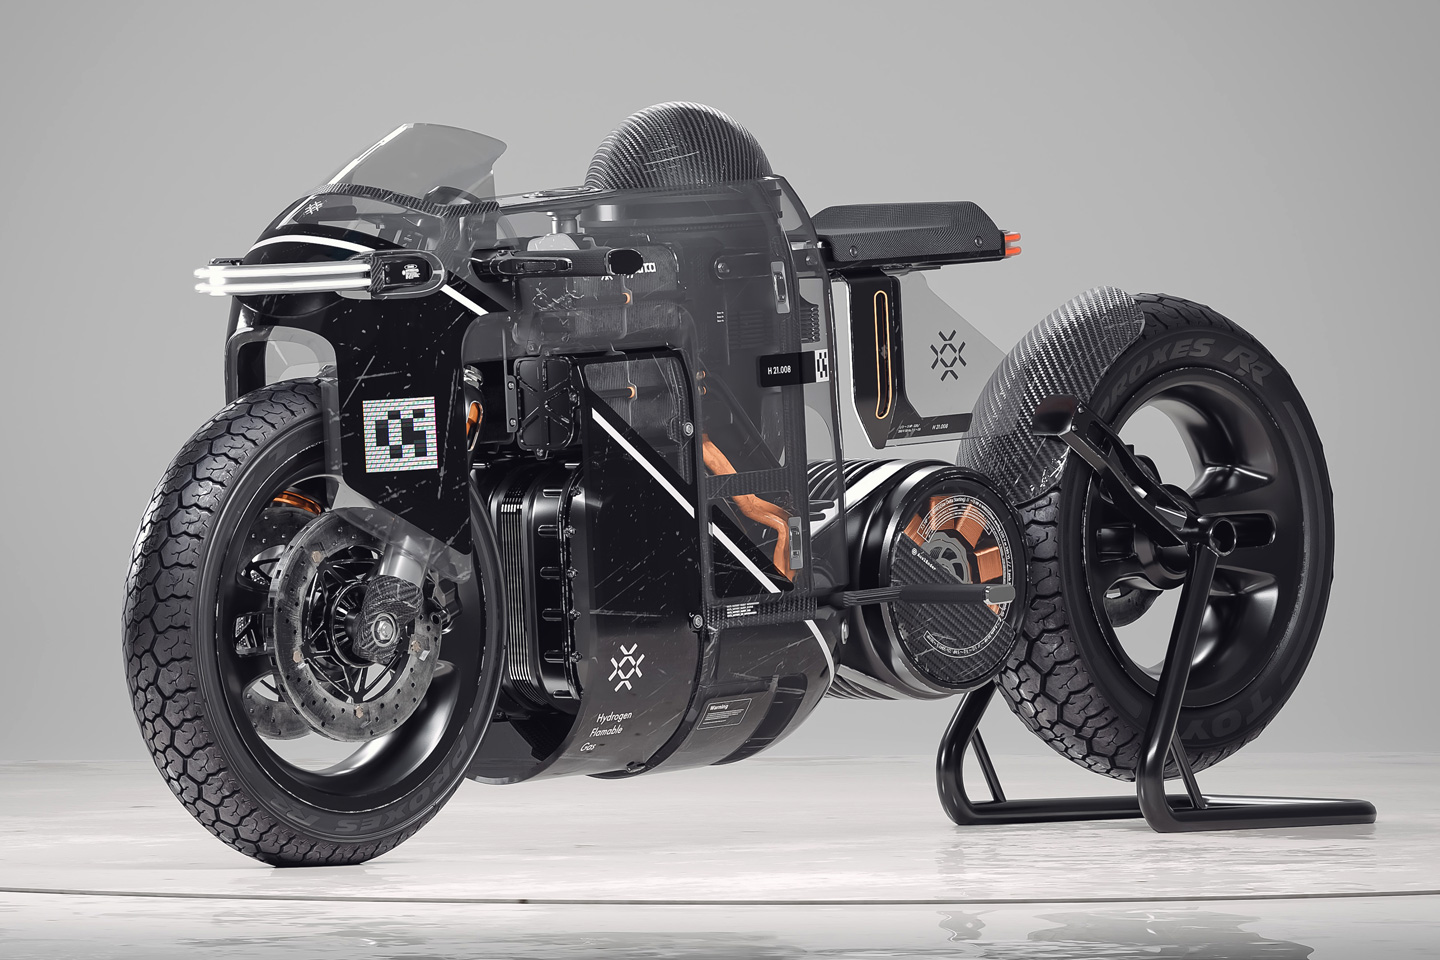 #This futuristic cyberpunk motorbike uses a hydrogen fuel cell that provides 100% clean energy